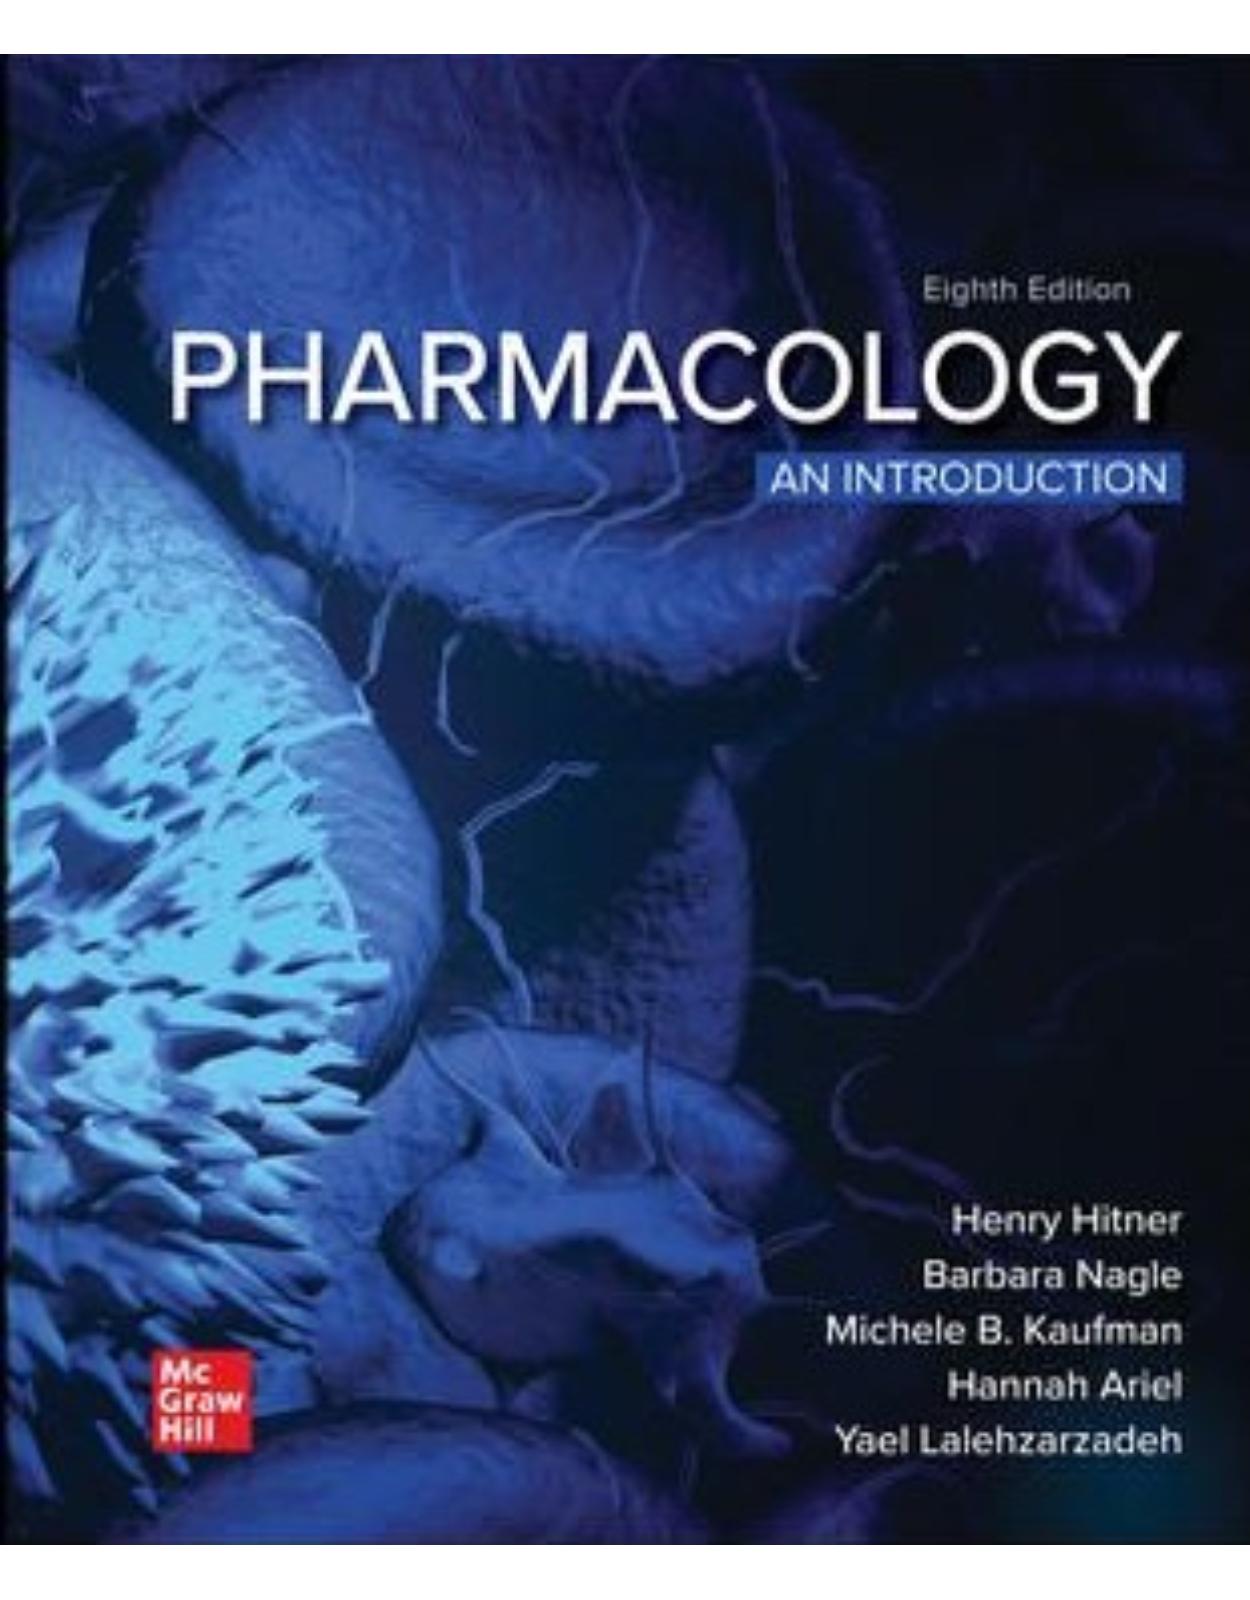 Ise Pharmacology: An Introduction